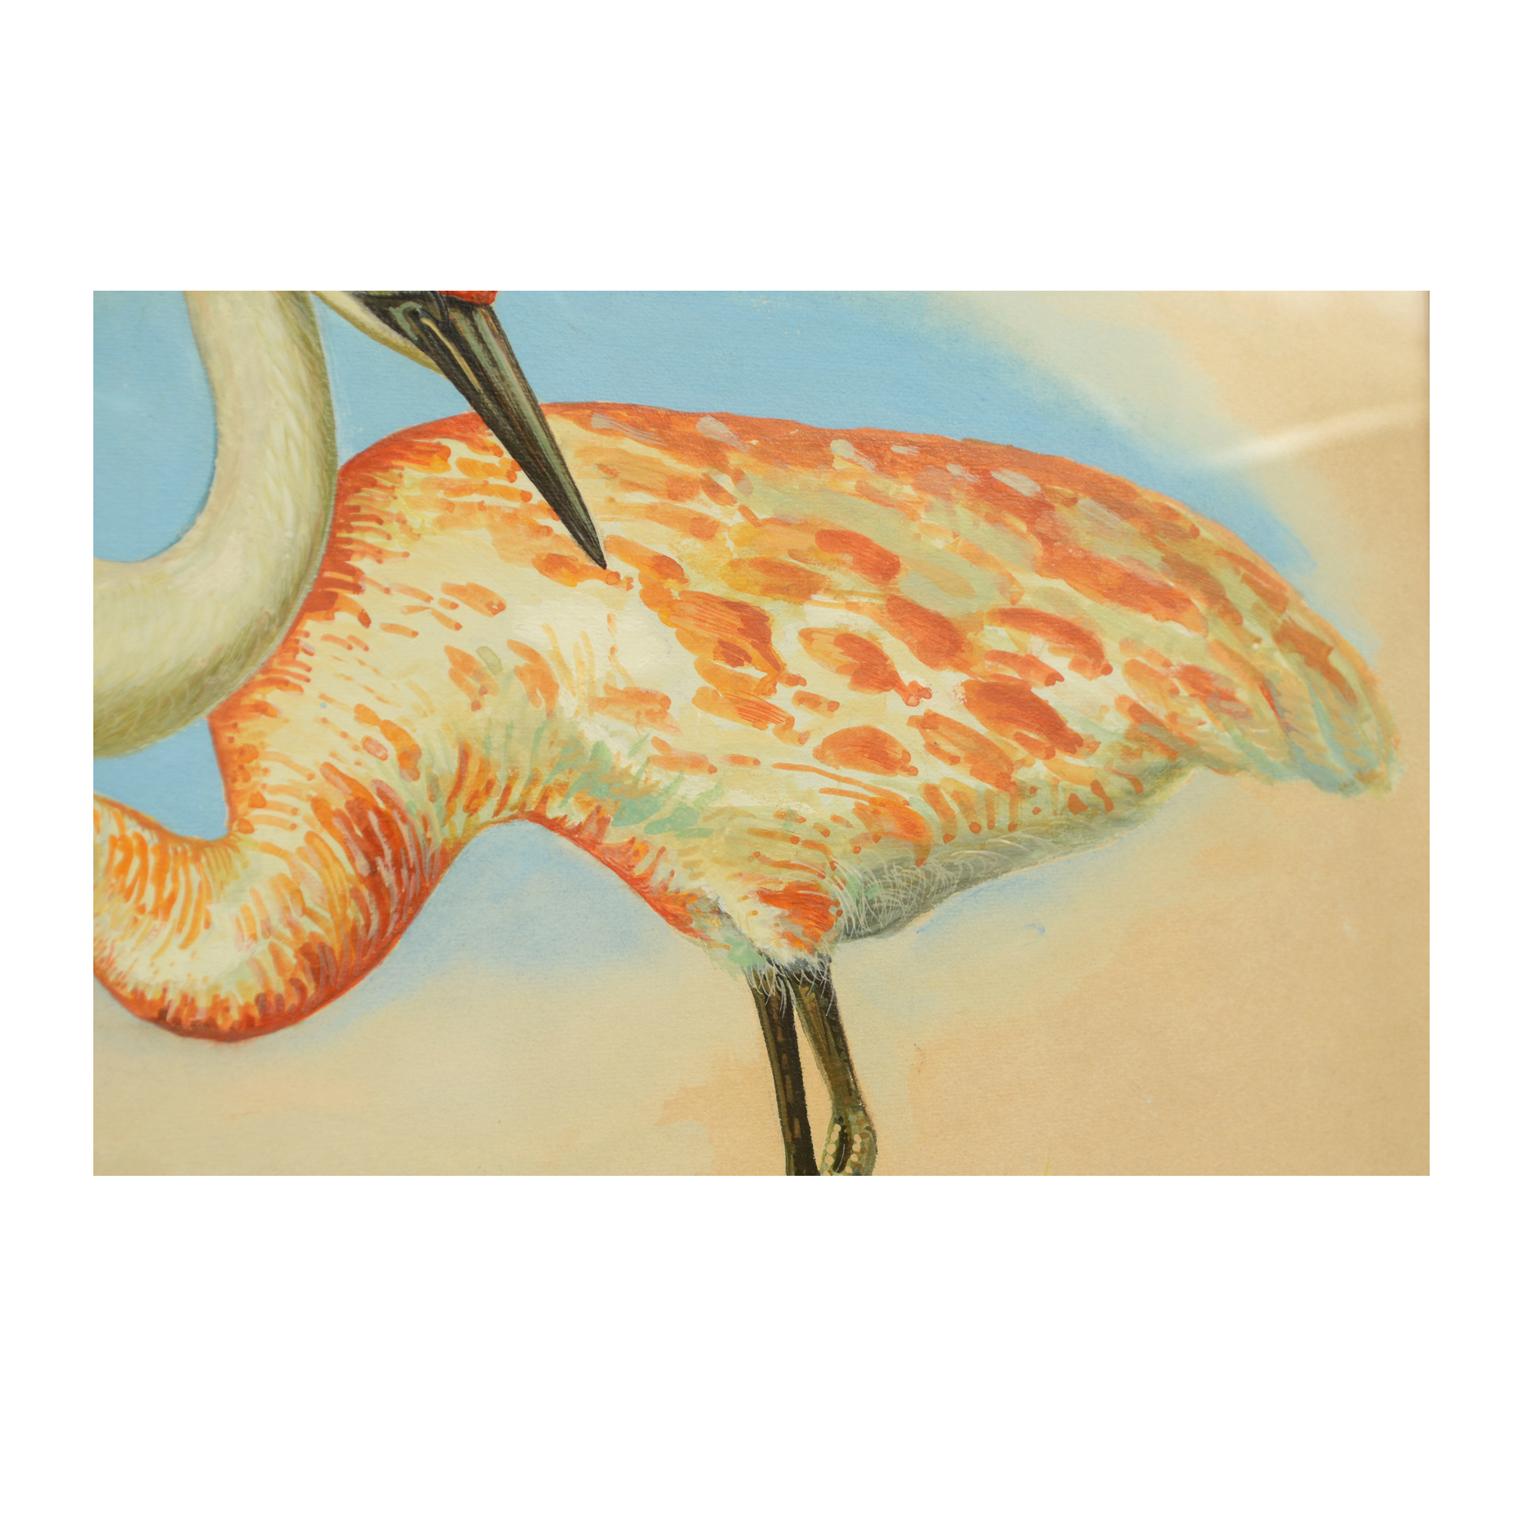 Late 20th Century Sketch of two herons Korea 1970s Acrylic on paper for an Animals Encyclopedia For Sale